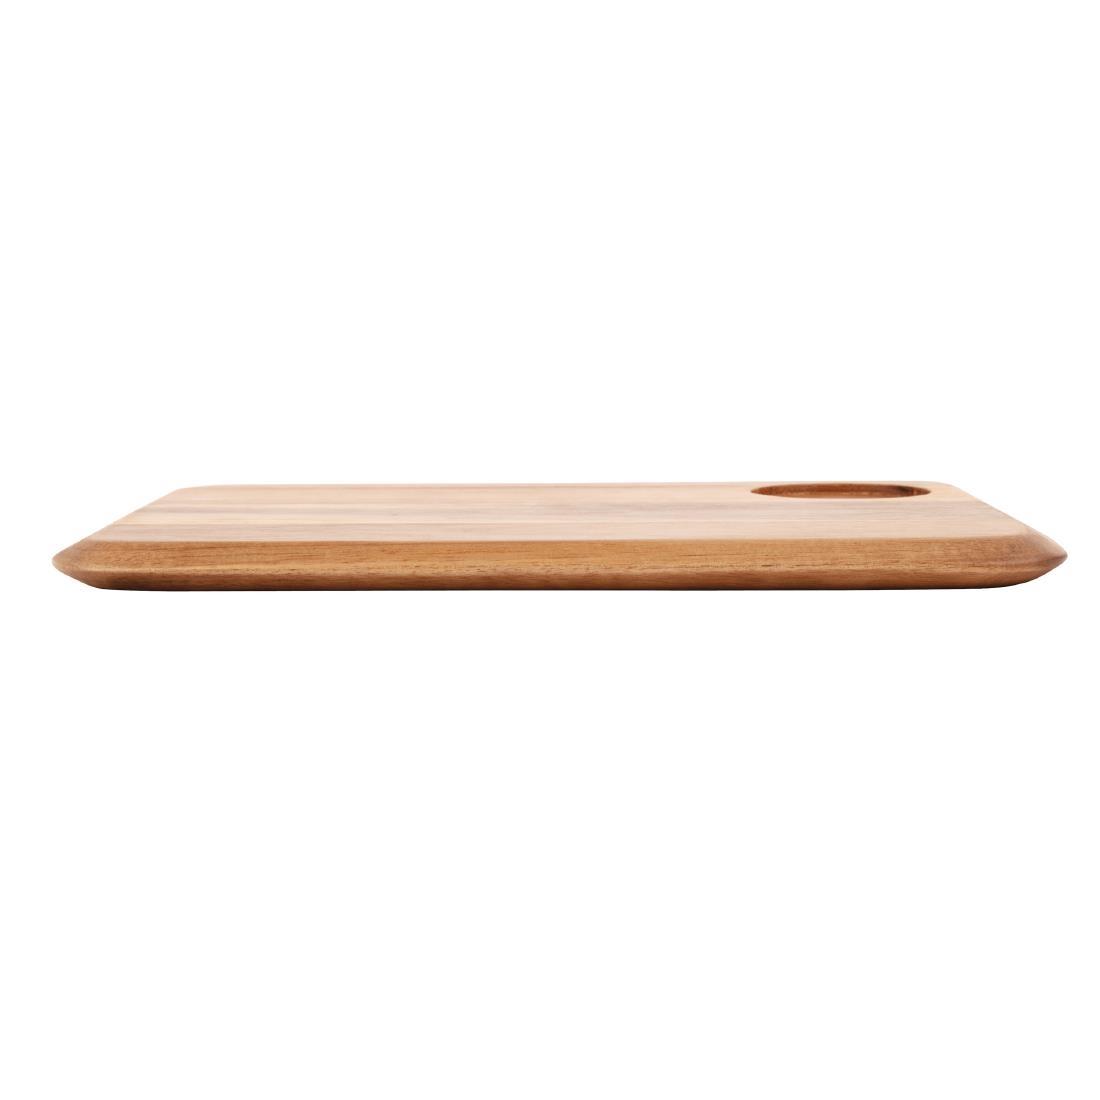 Rounded Acacia Wooden Serving Board - DP156  - 3